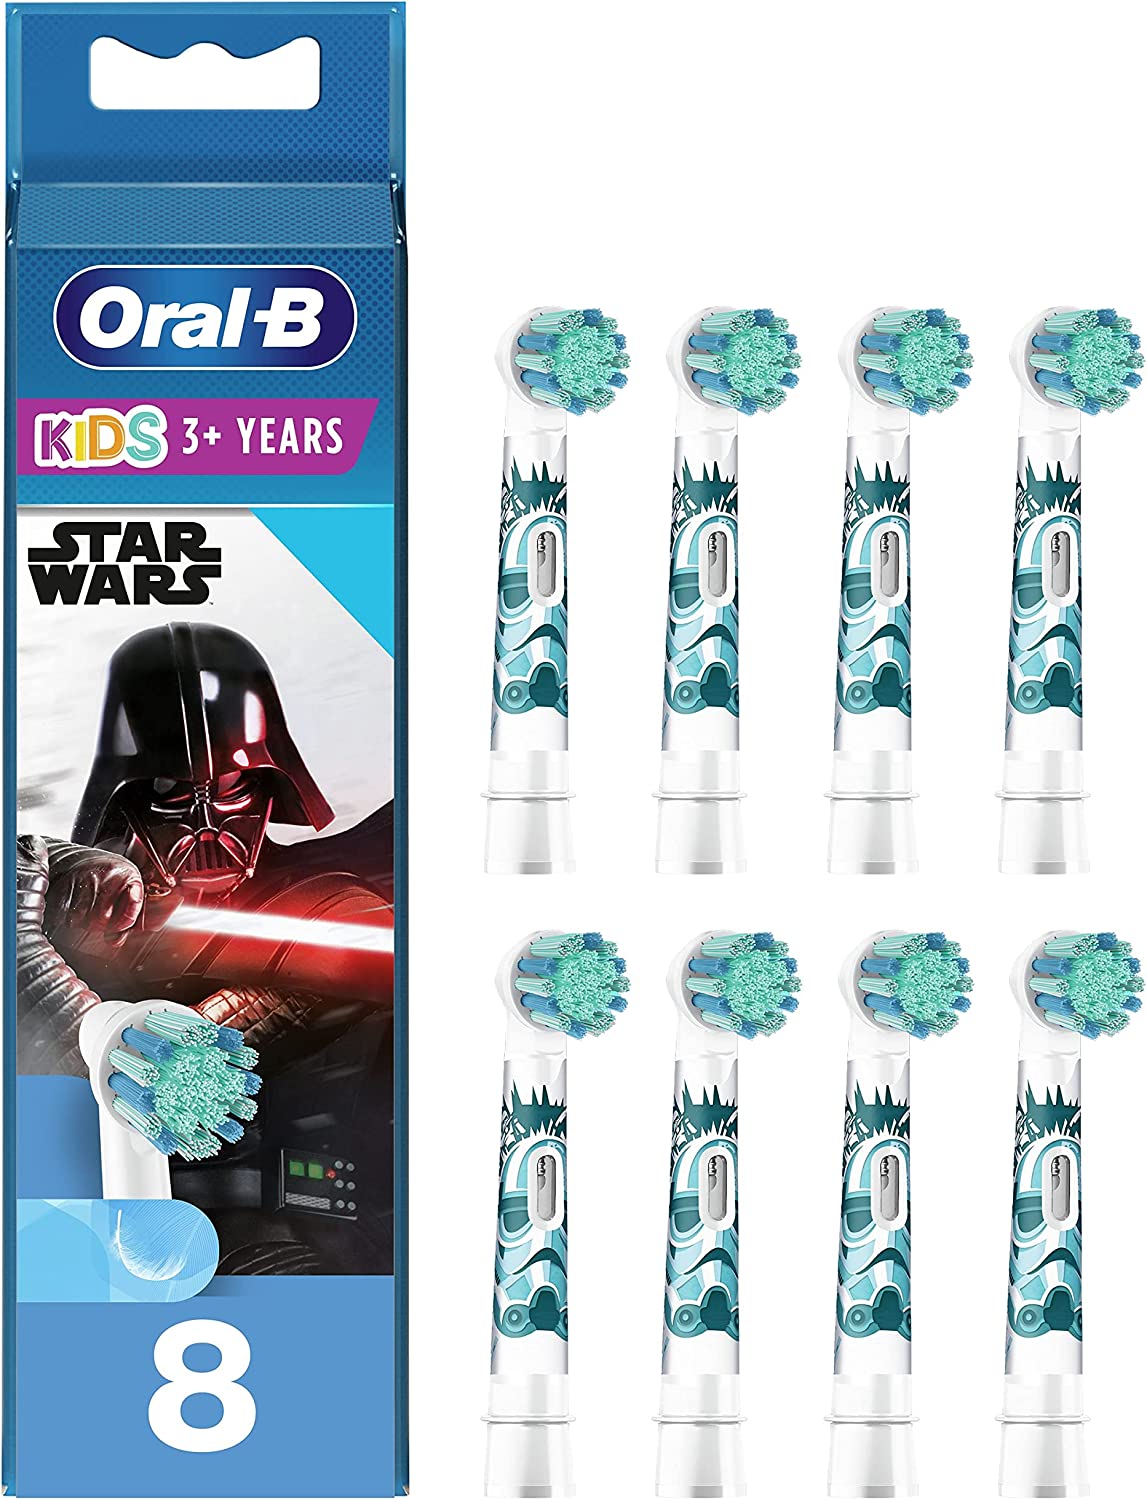 8 x Oral-B Kids Star Wars Replacement Heads Childrens Electric Toothbrush